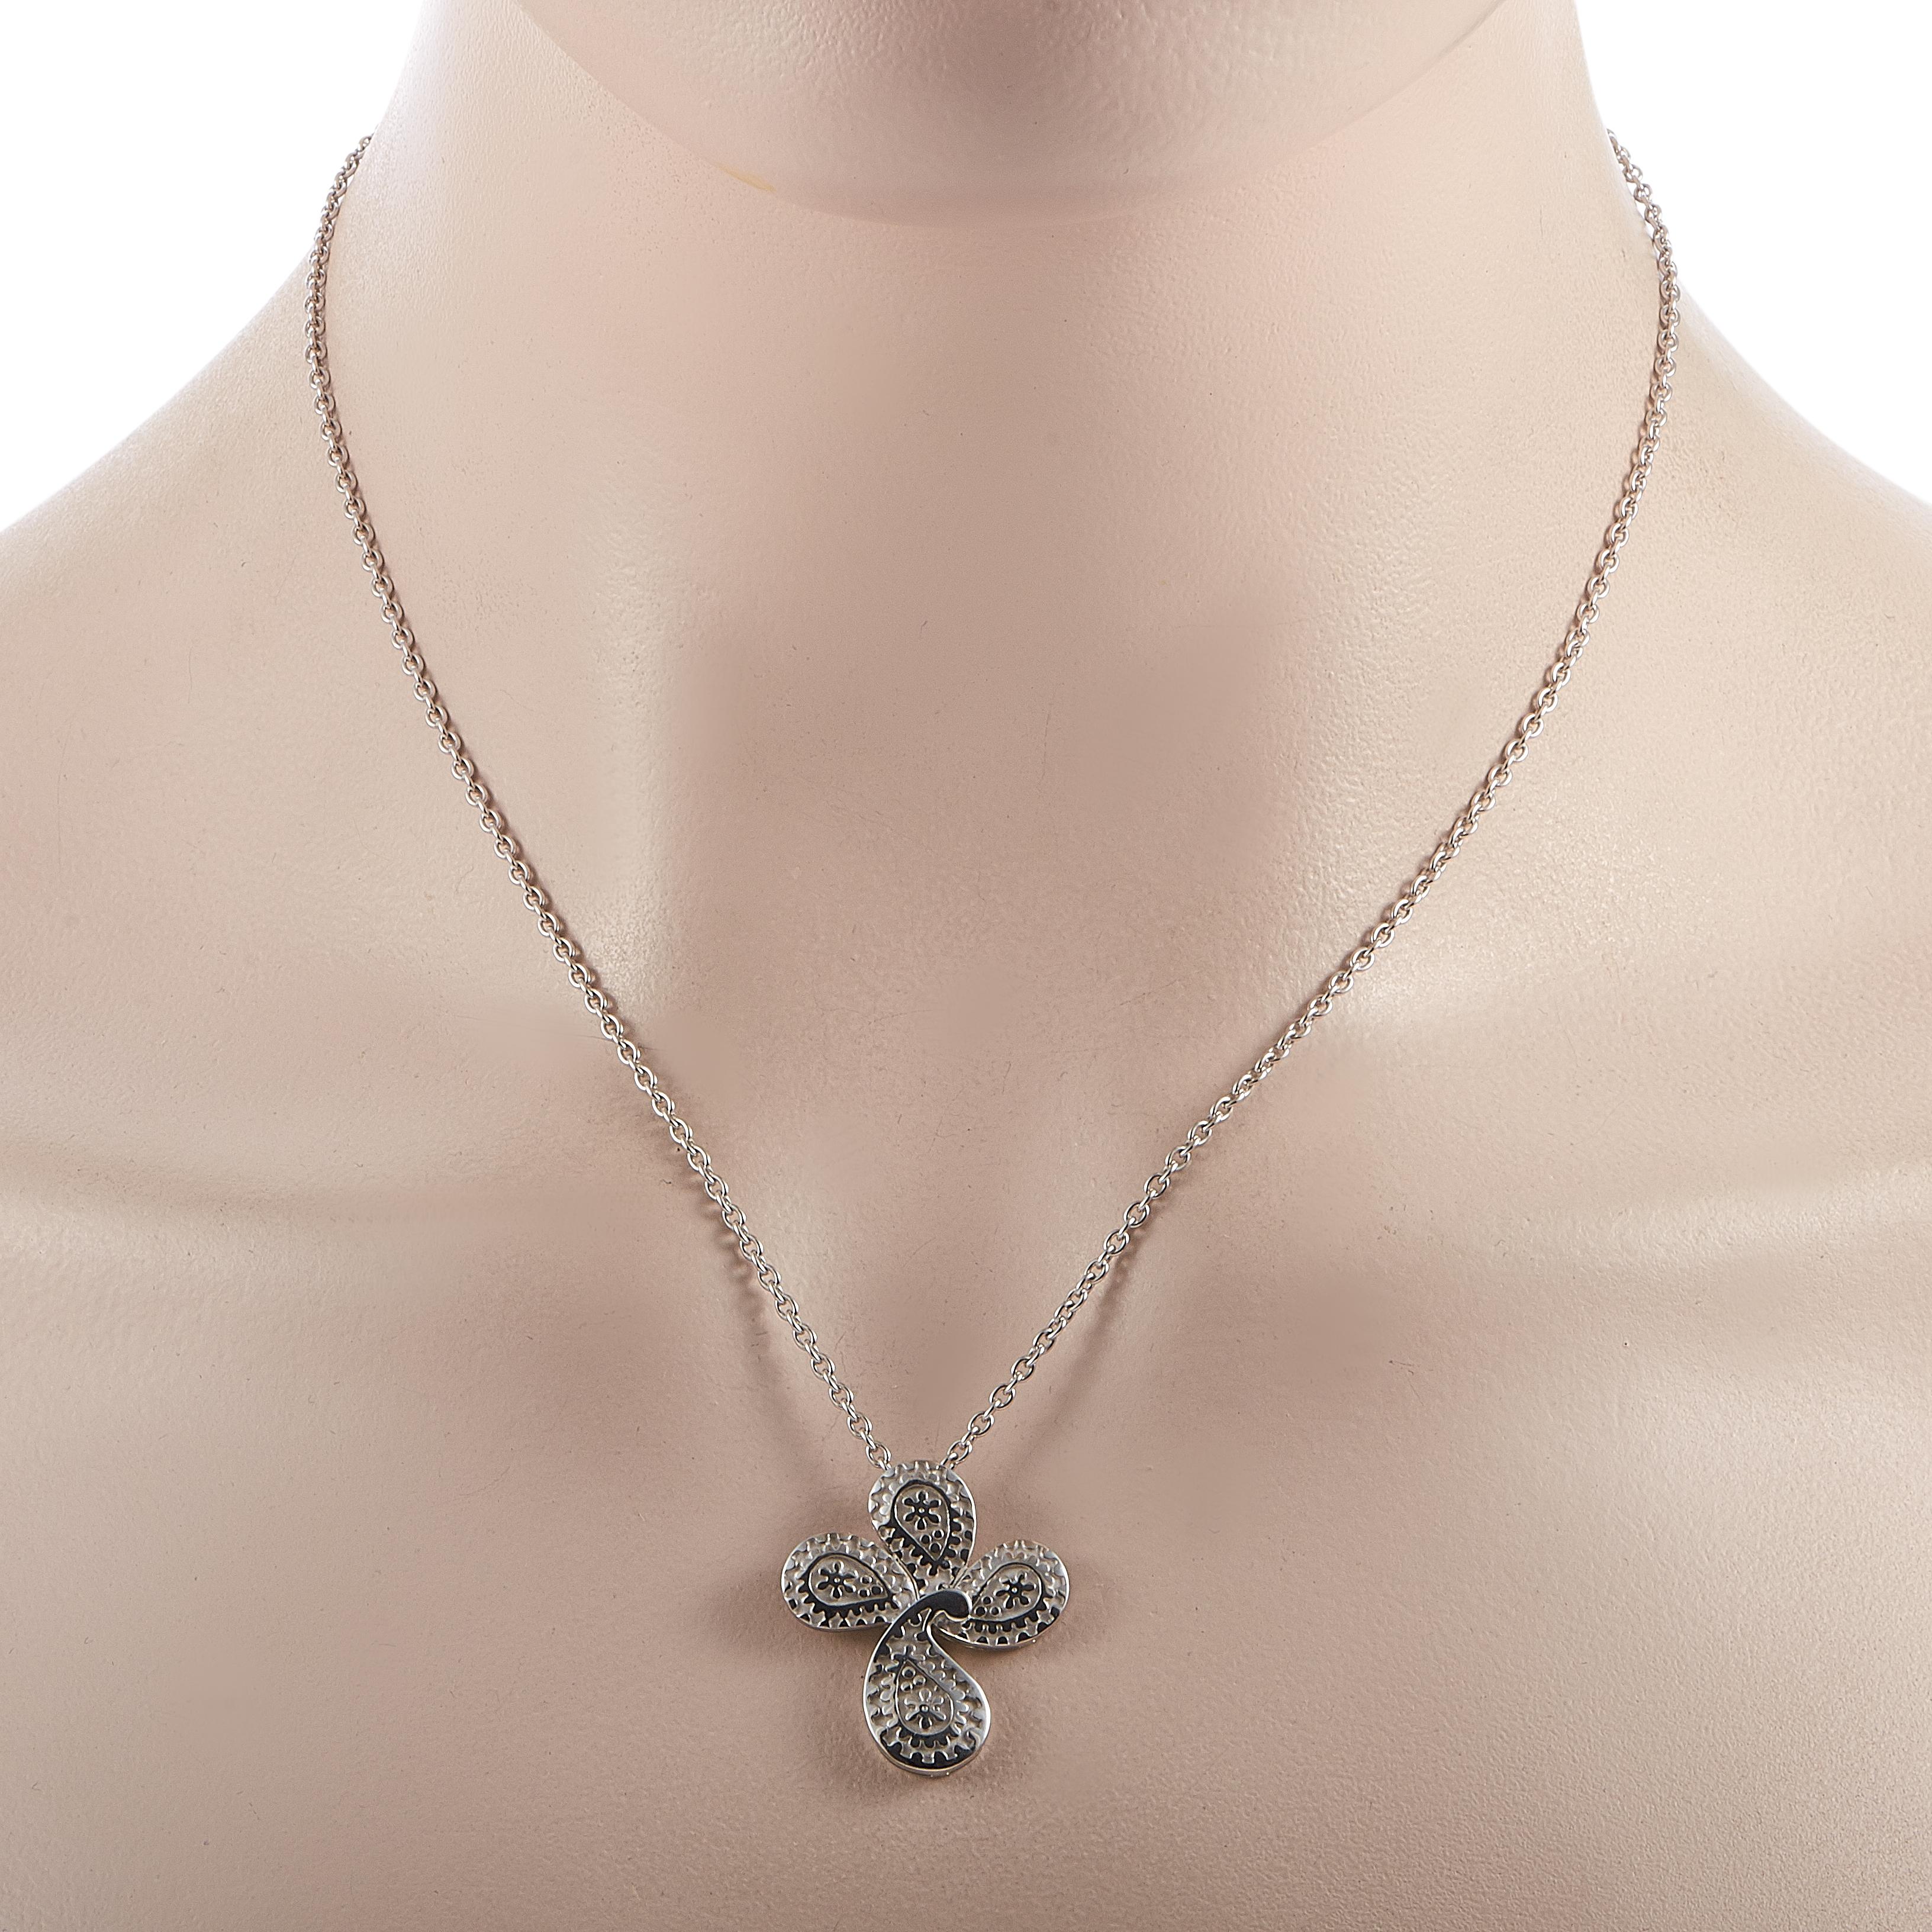 This Carrera y Carrera necklace is crafted from 18K white gold and weighs 12 grams. The necklace is presented with an 18” chain, onto which a 1” by 0.88” cross pendant is attached.

Offered in estate condition, this jewelry piece includes a gift box.